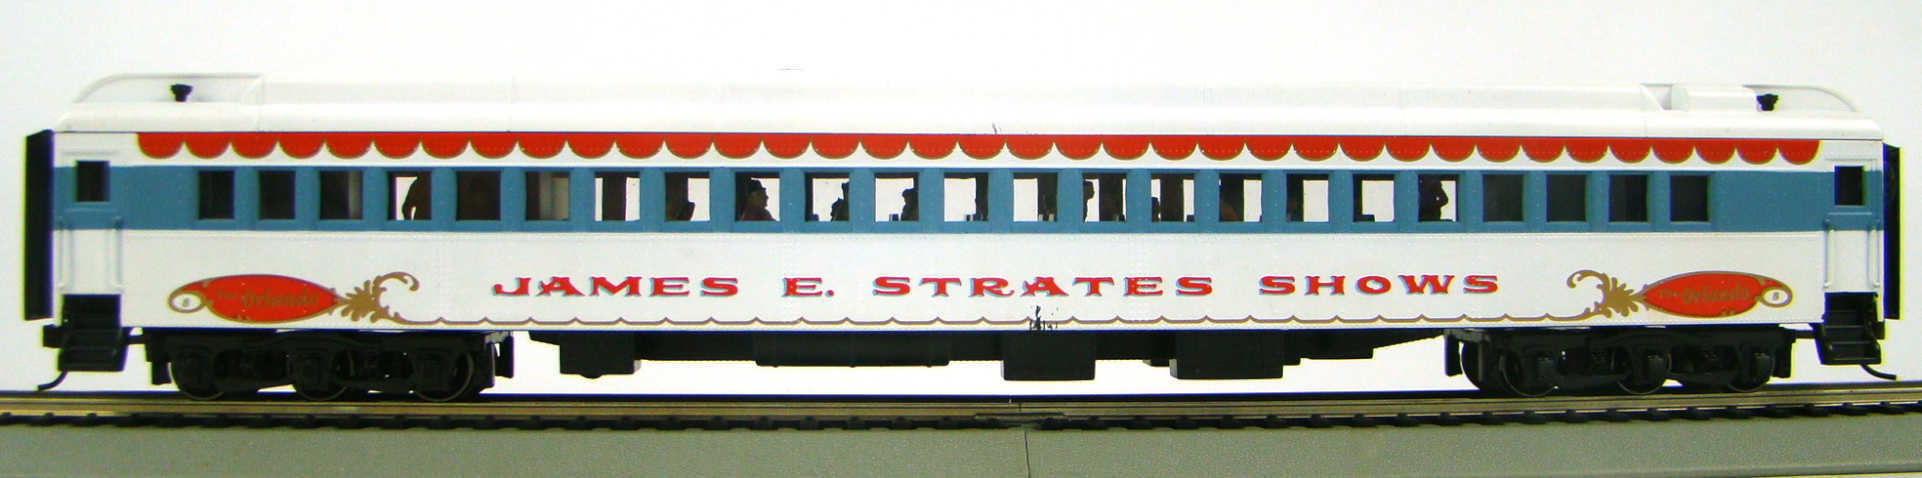 HO James E Strates Shows Circus Observation Car 49757 IHC for sale online